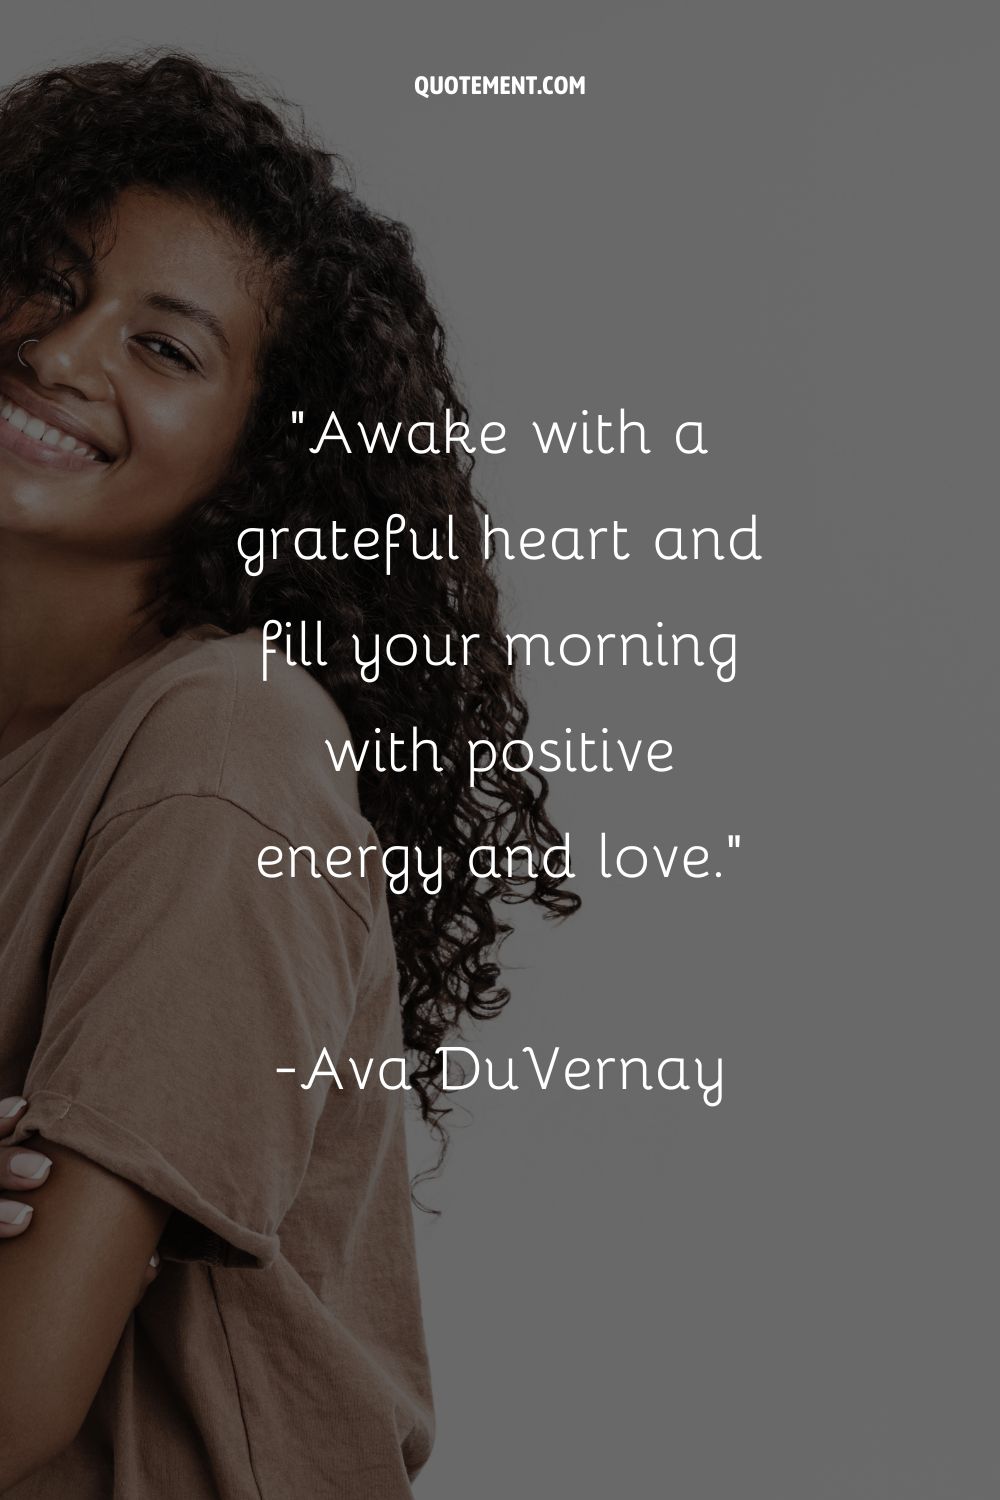 Awake with a grateful heart and fill your morning with positive energy and love